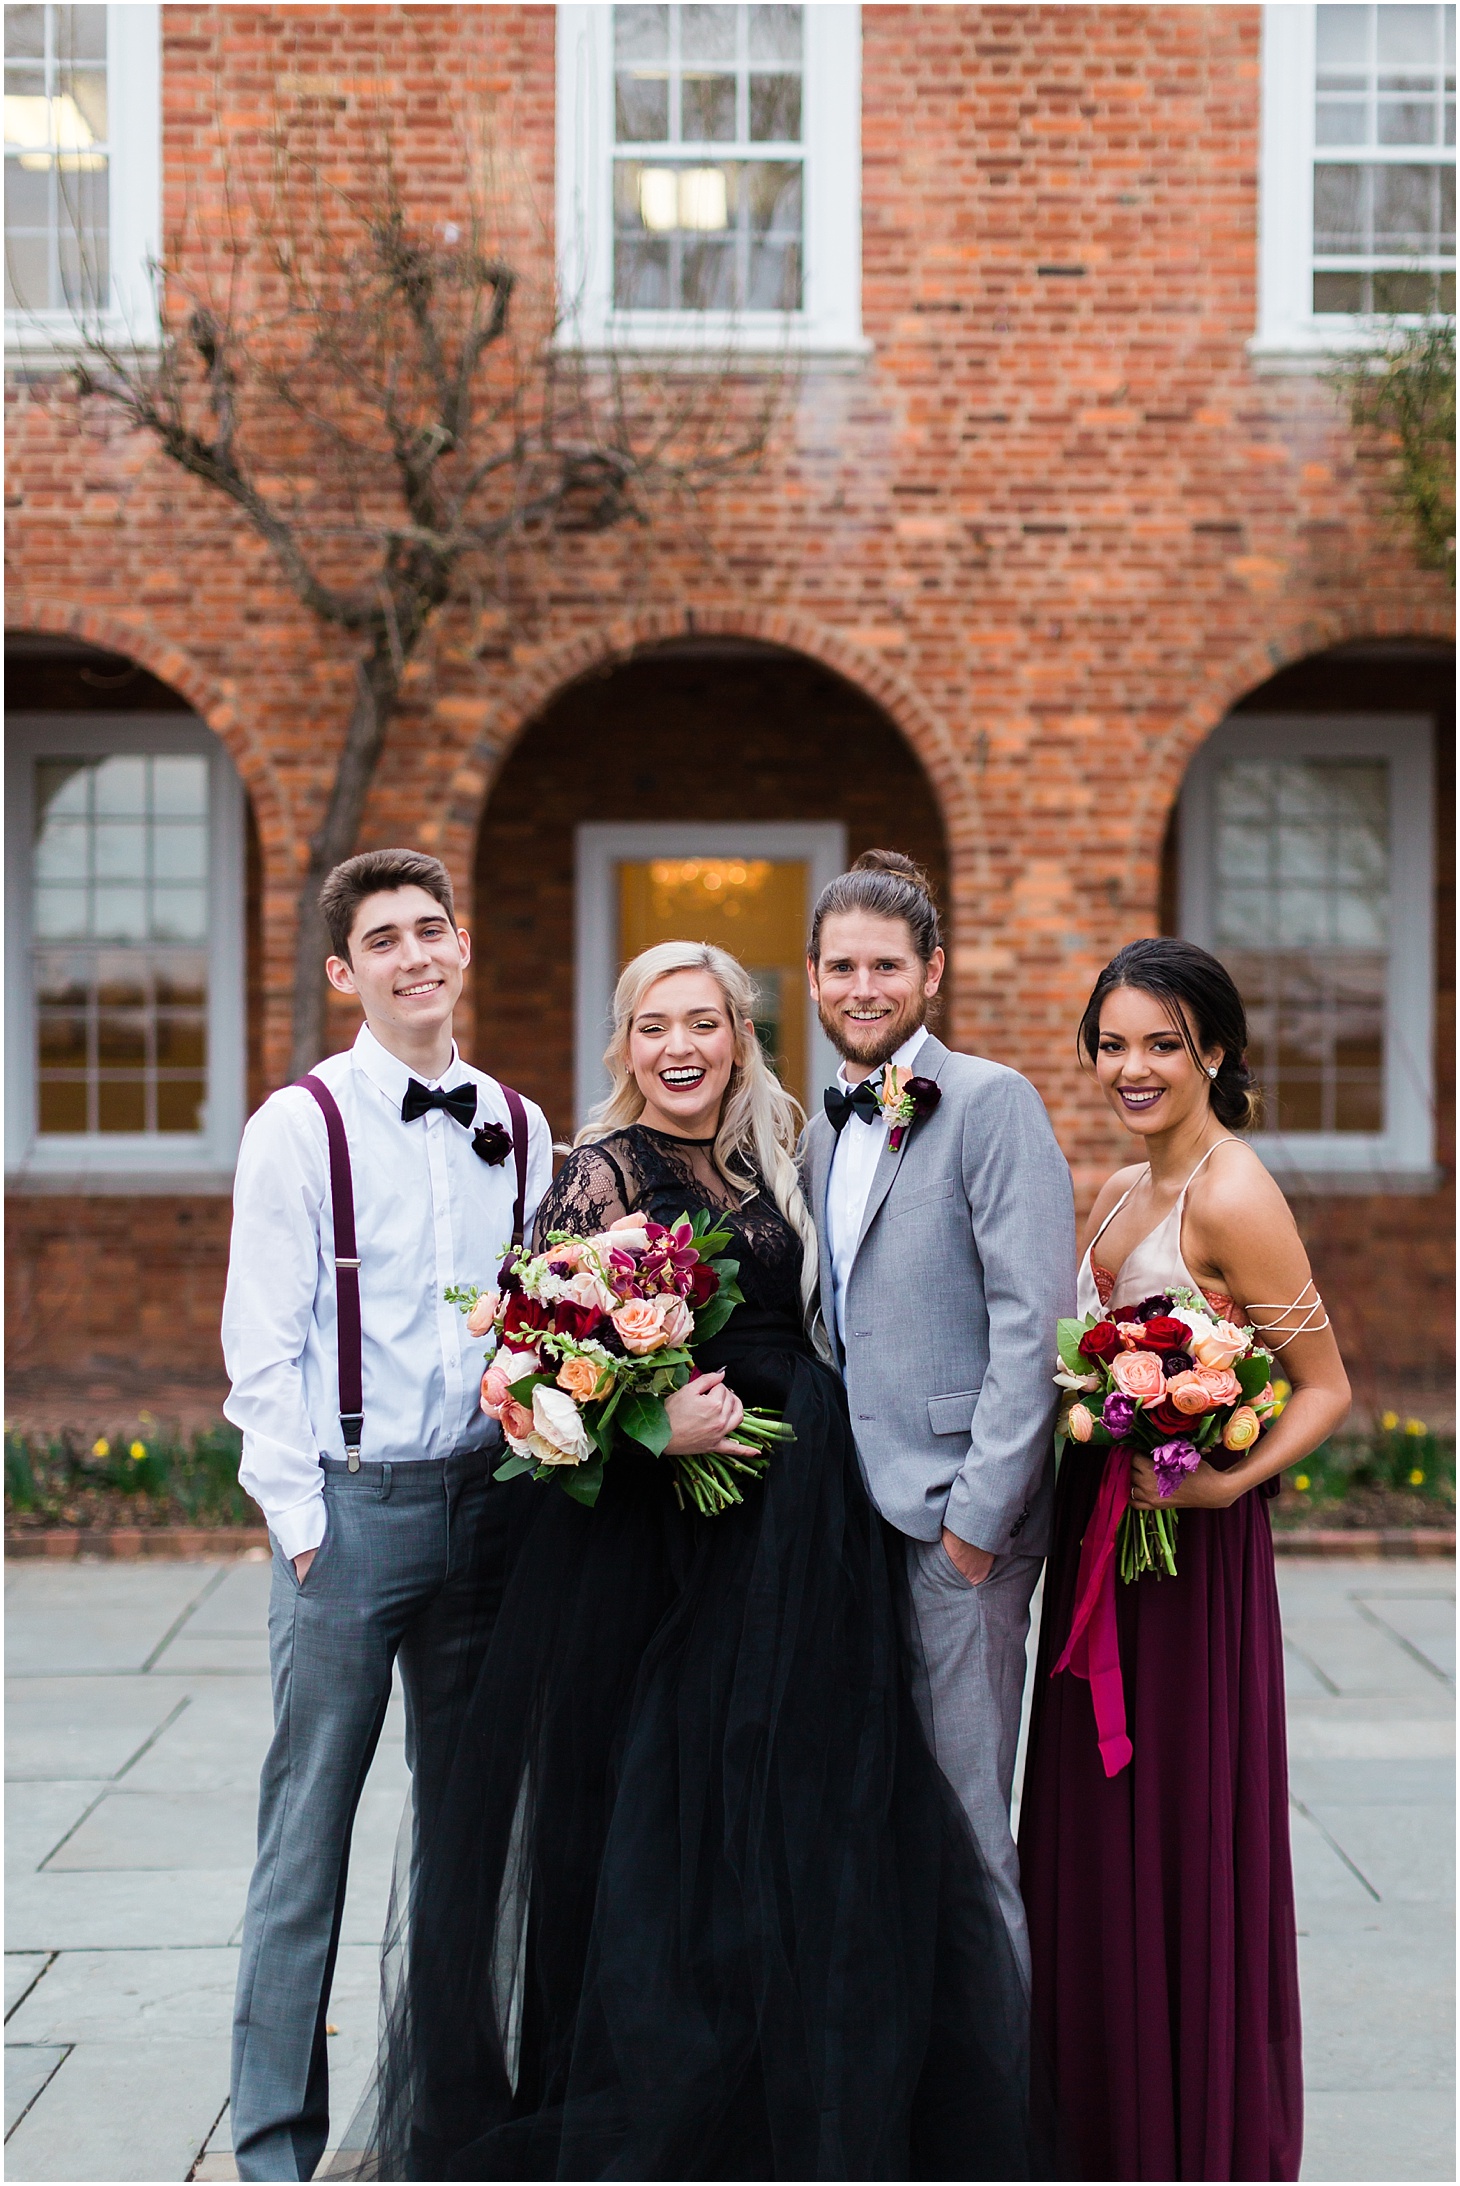 Wedding Party at River Farm in Alexandria, VA | Black and Red Gothic-Inspired Wedding Editorial | Sarah Bradshaw Photography